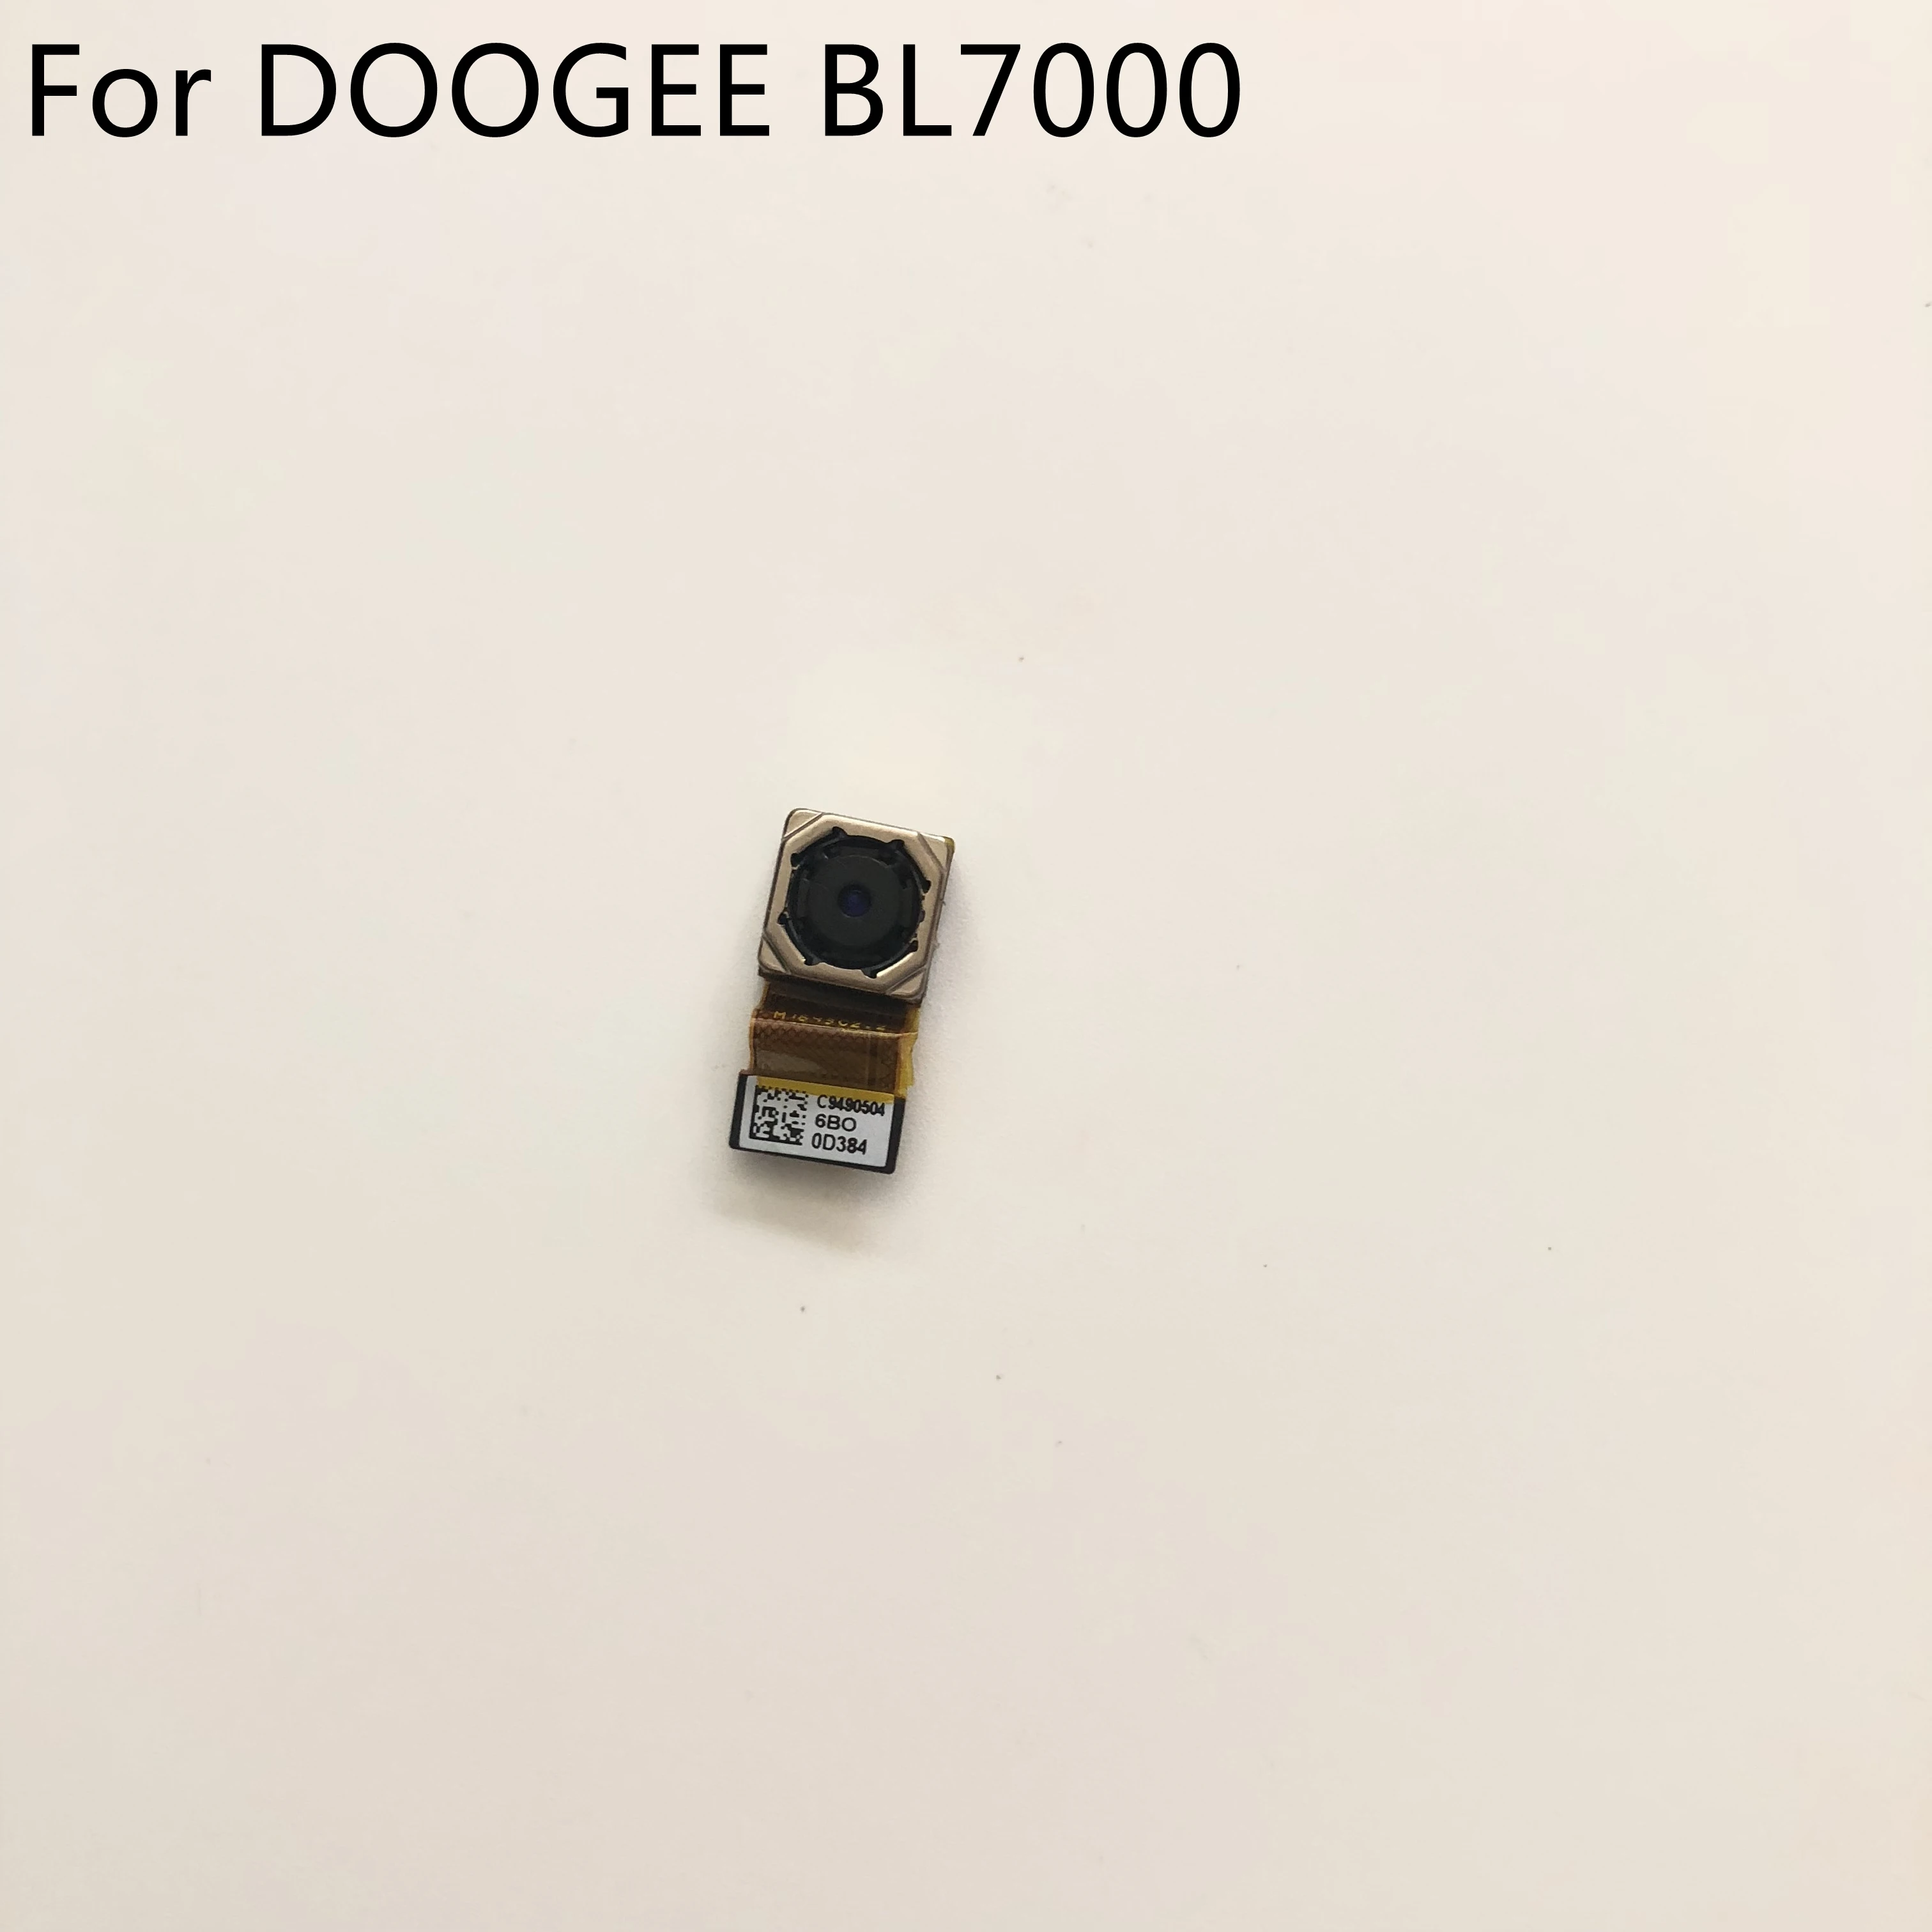 

High Quality Original Front Camera 13.0MP Module For DOOGEE BL7000 MTK6750T Octa Core 5.5'' FHD 1920x1080 Free Shipping